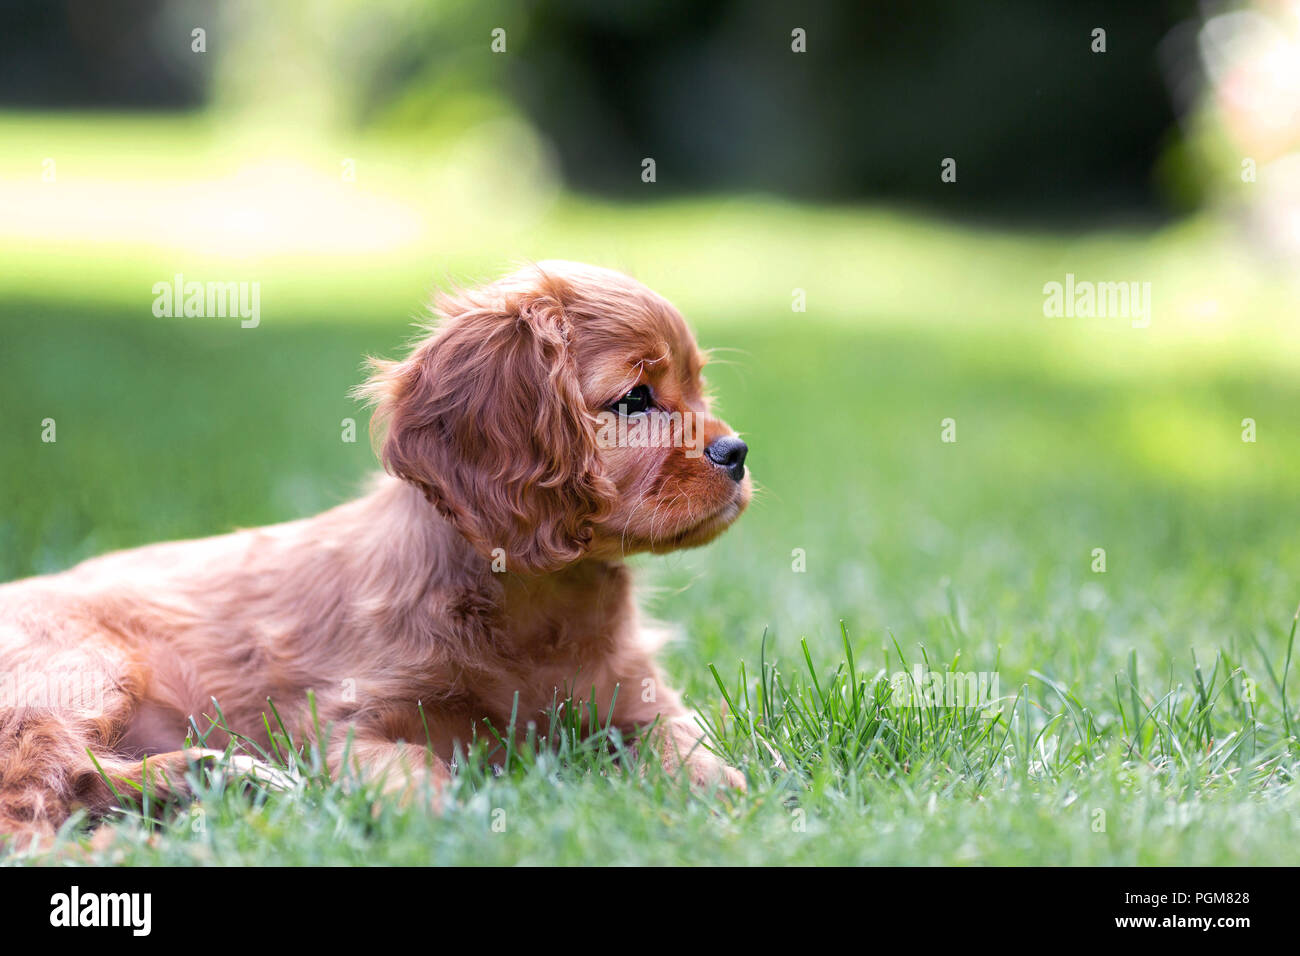 Cute puppy lying on the grass Stock Photo